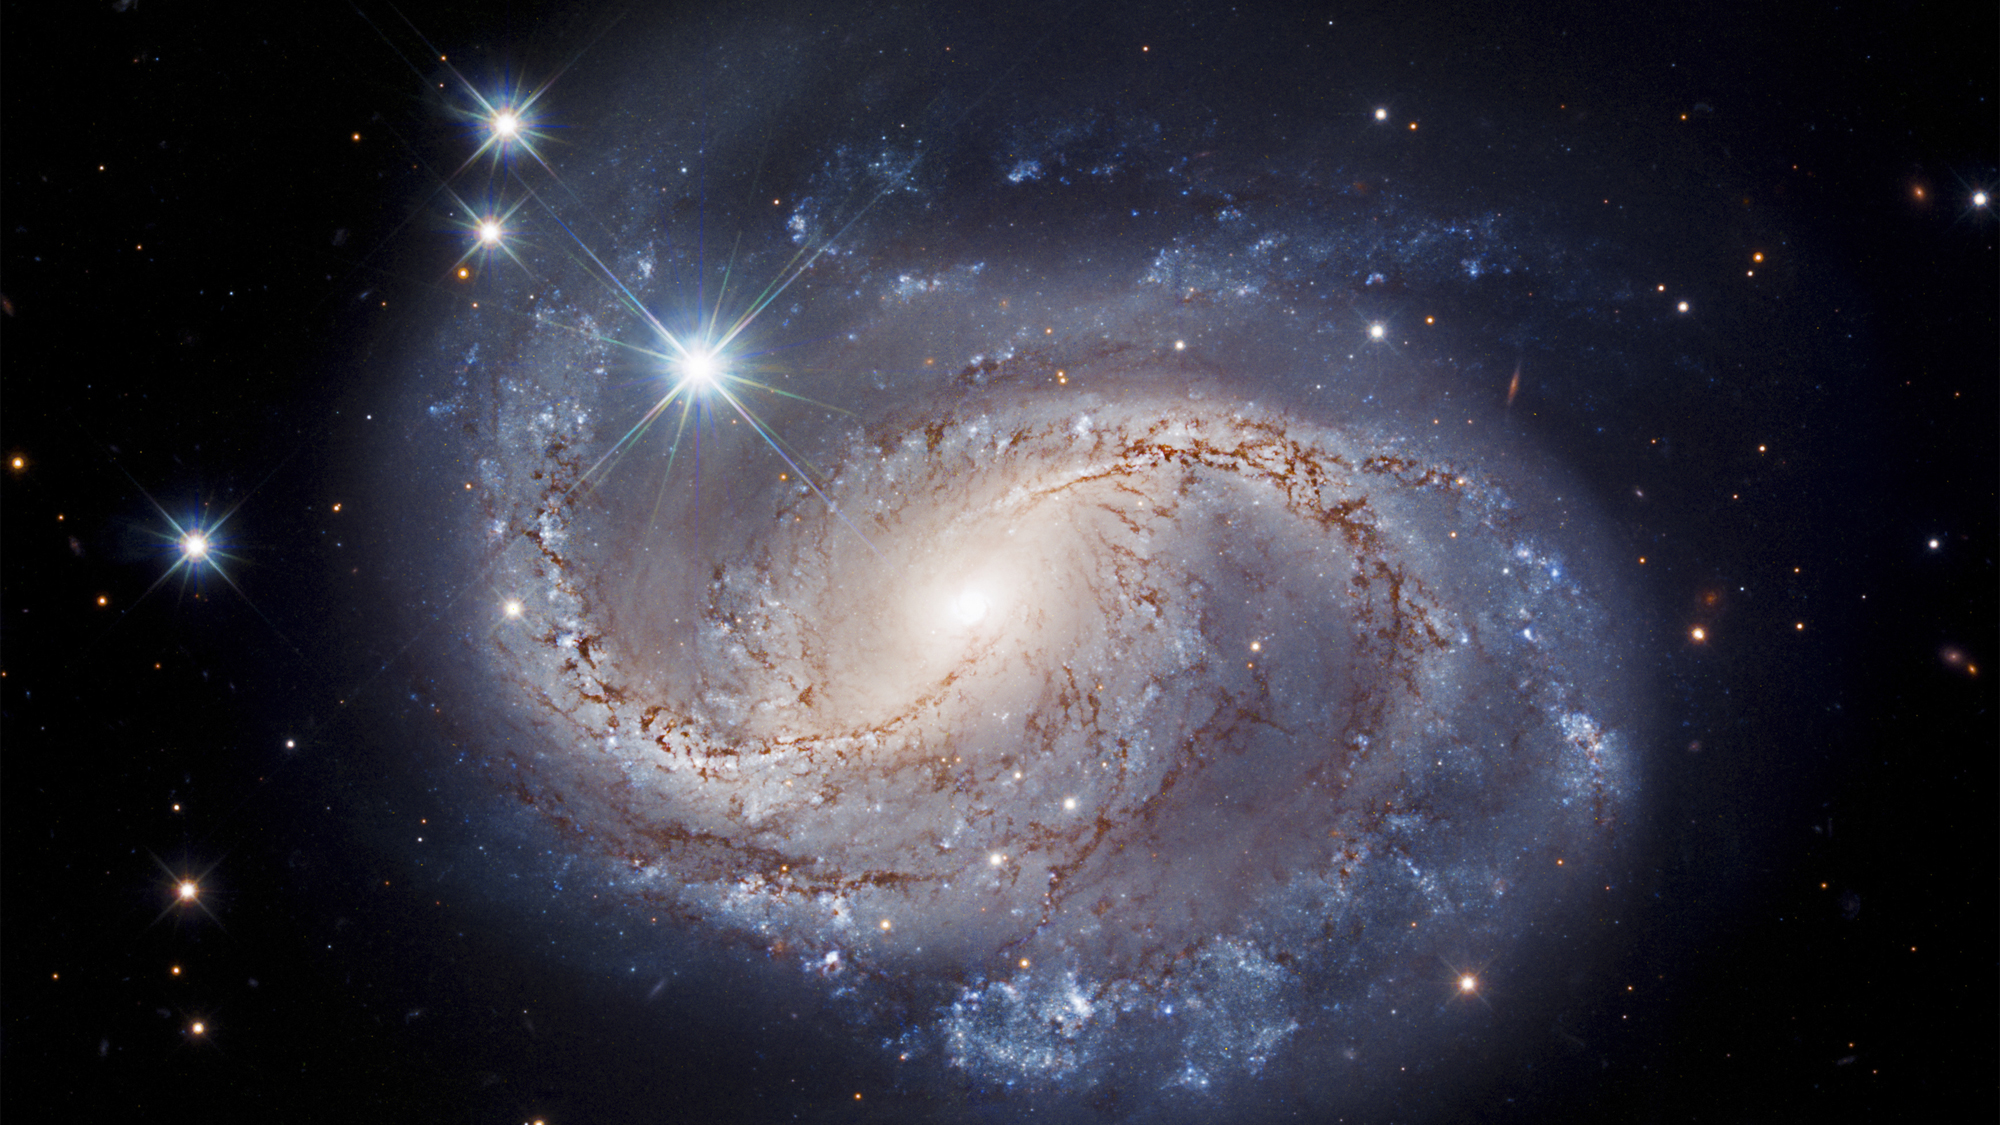 This gorgeous spiral galaxy spotted by Hubble telescope is a yardstick for galactic expansion